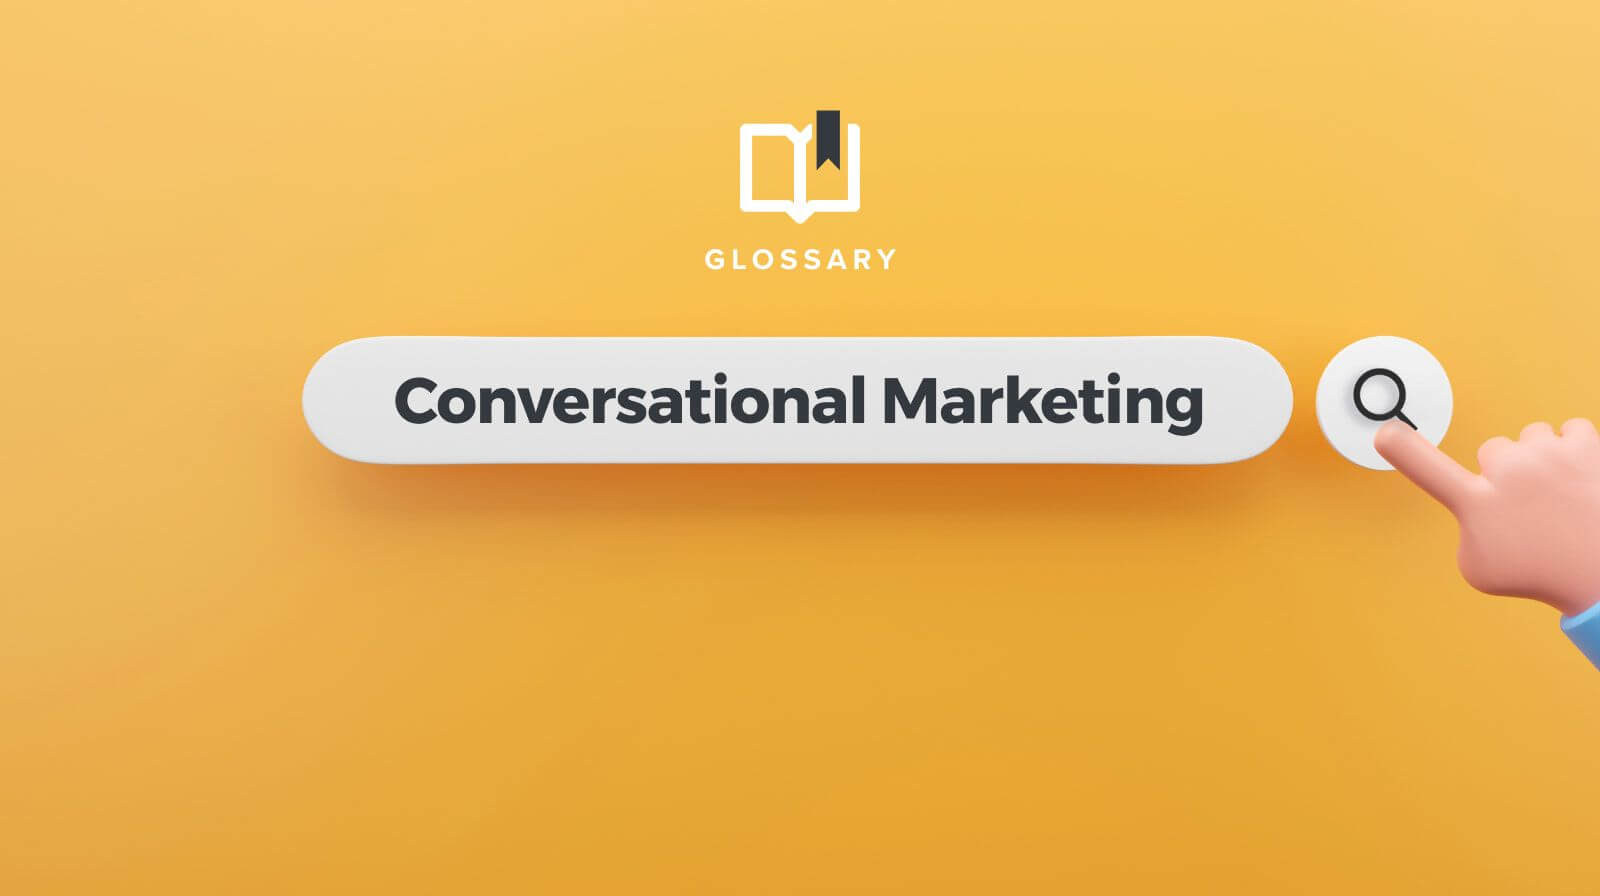  Featured image: Conversational marketing is an essential part of your customer experience strategy.  - Read full post: What is Conversational Marketing & Why You Need It